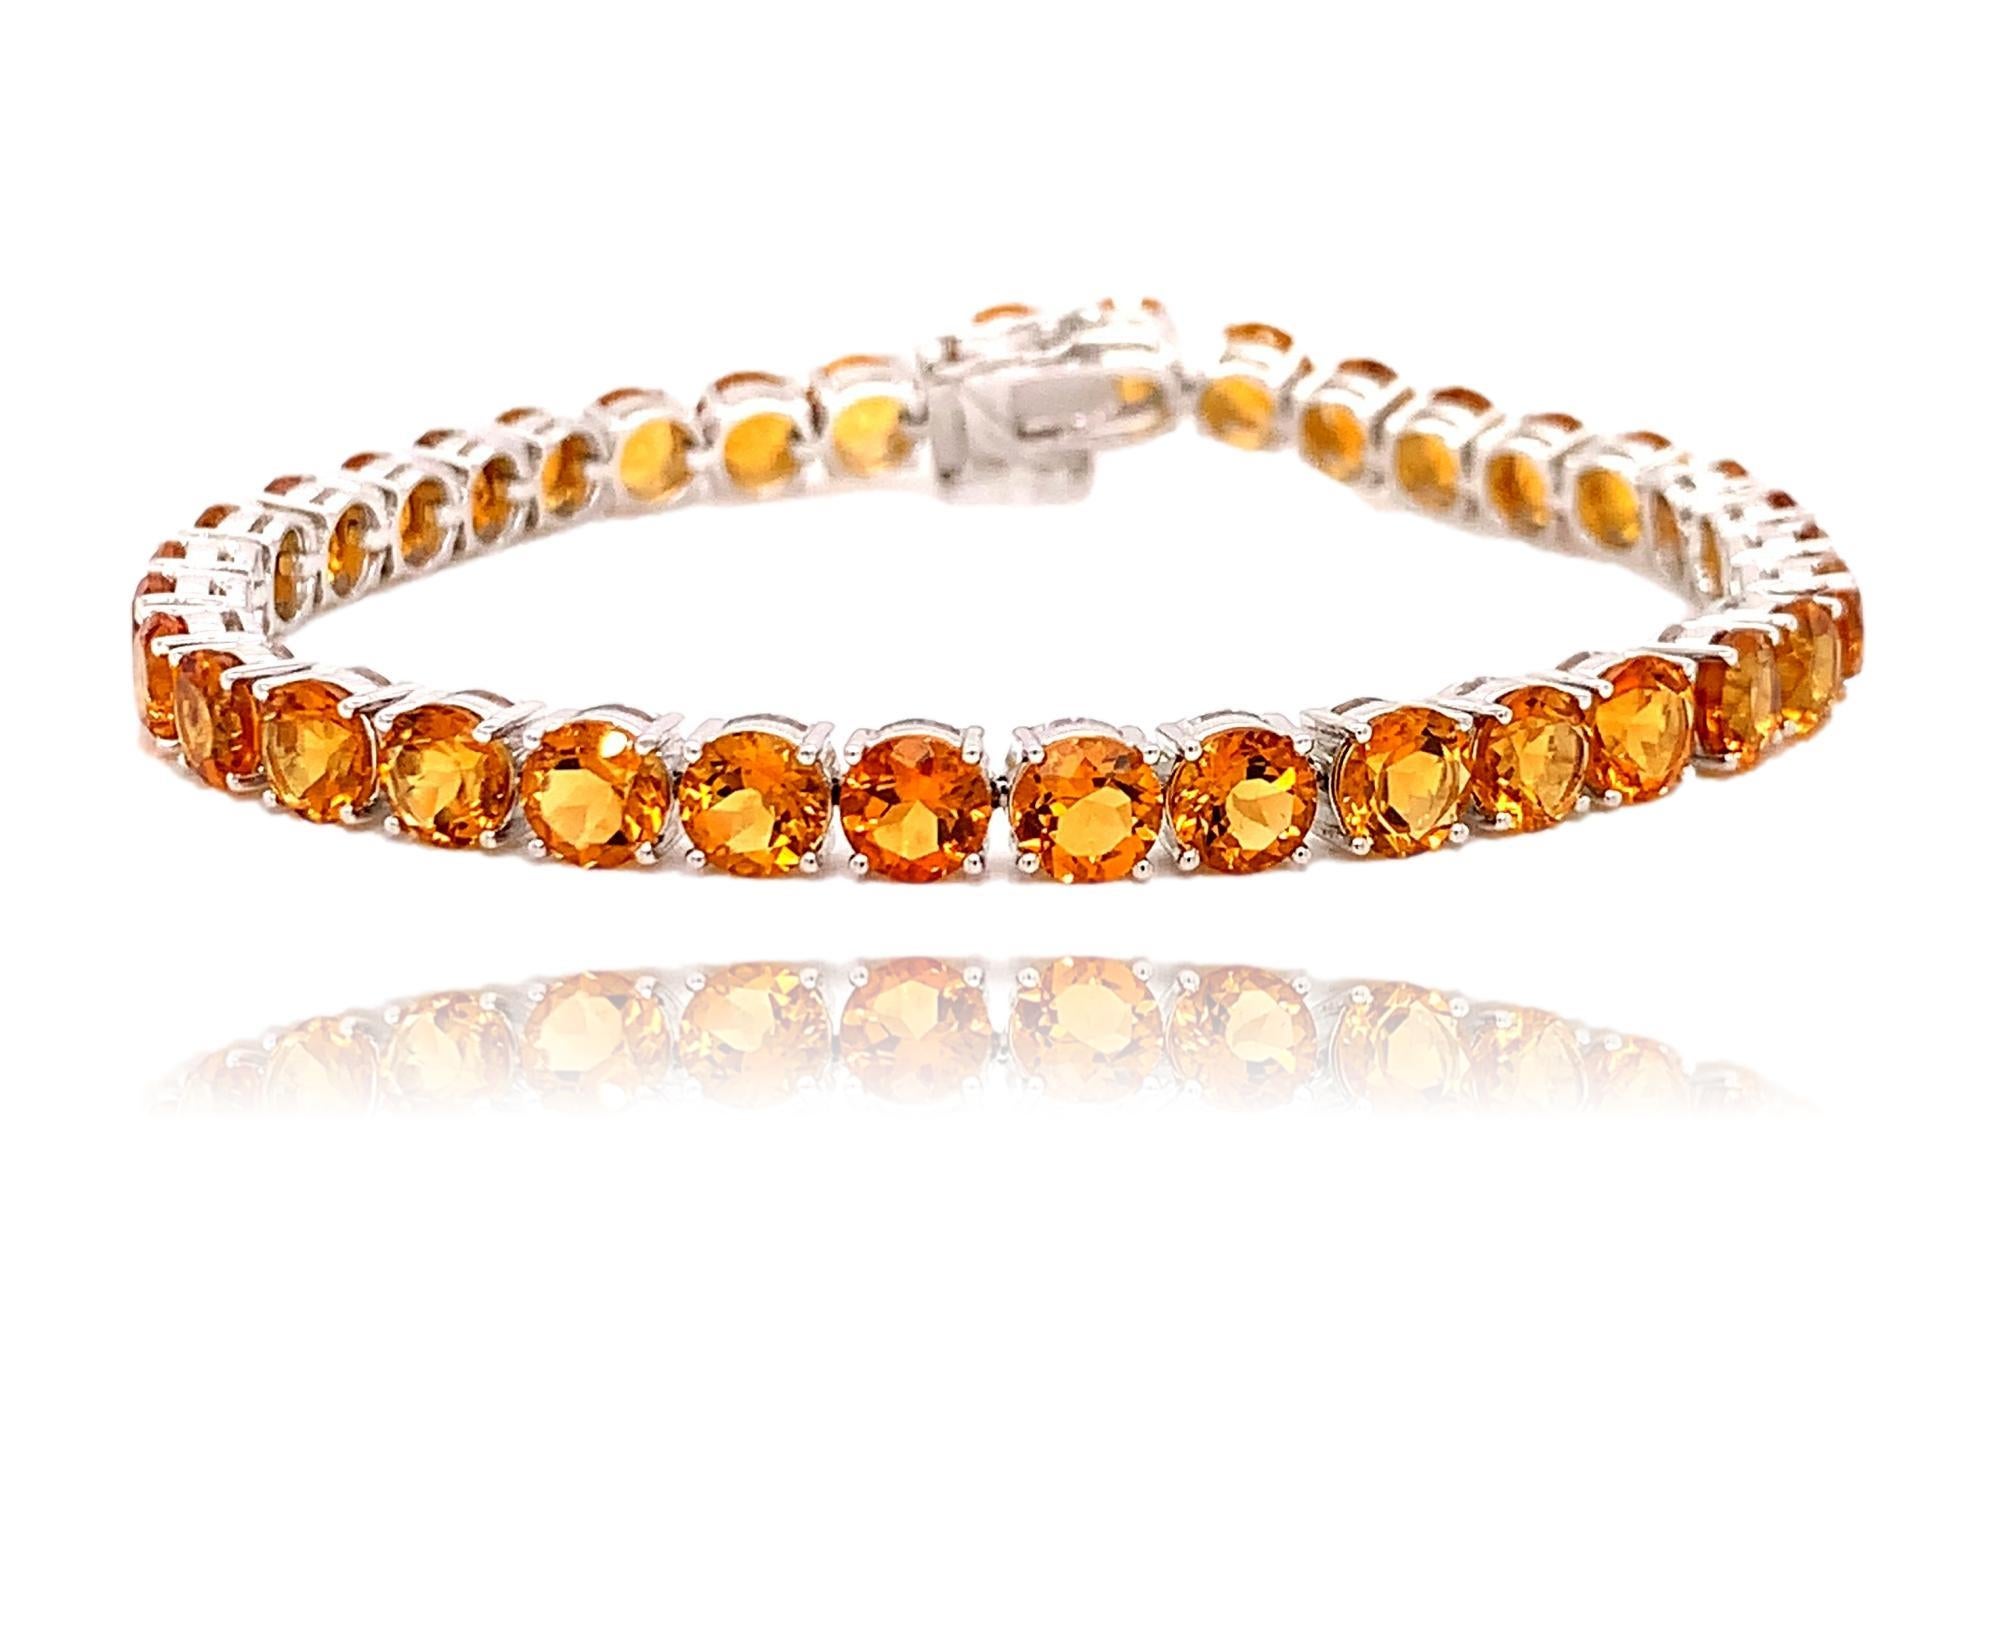 This stunning 10K White Gold Citrine Tennis Bracelet has 35 5.0mm round sparkling Citrine all with 4 prong setting. The bracelet is 7